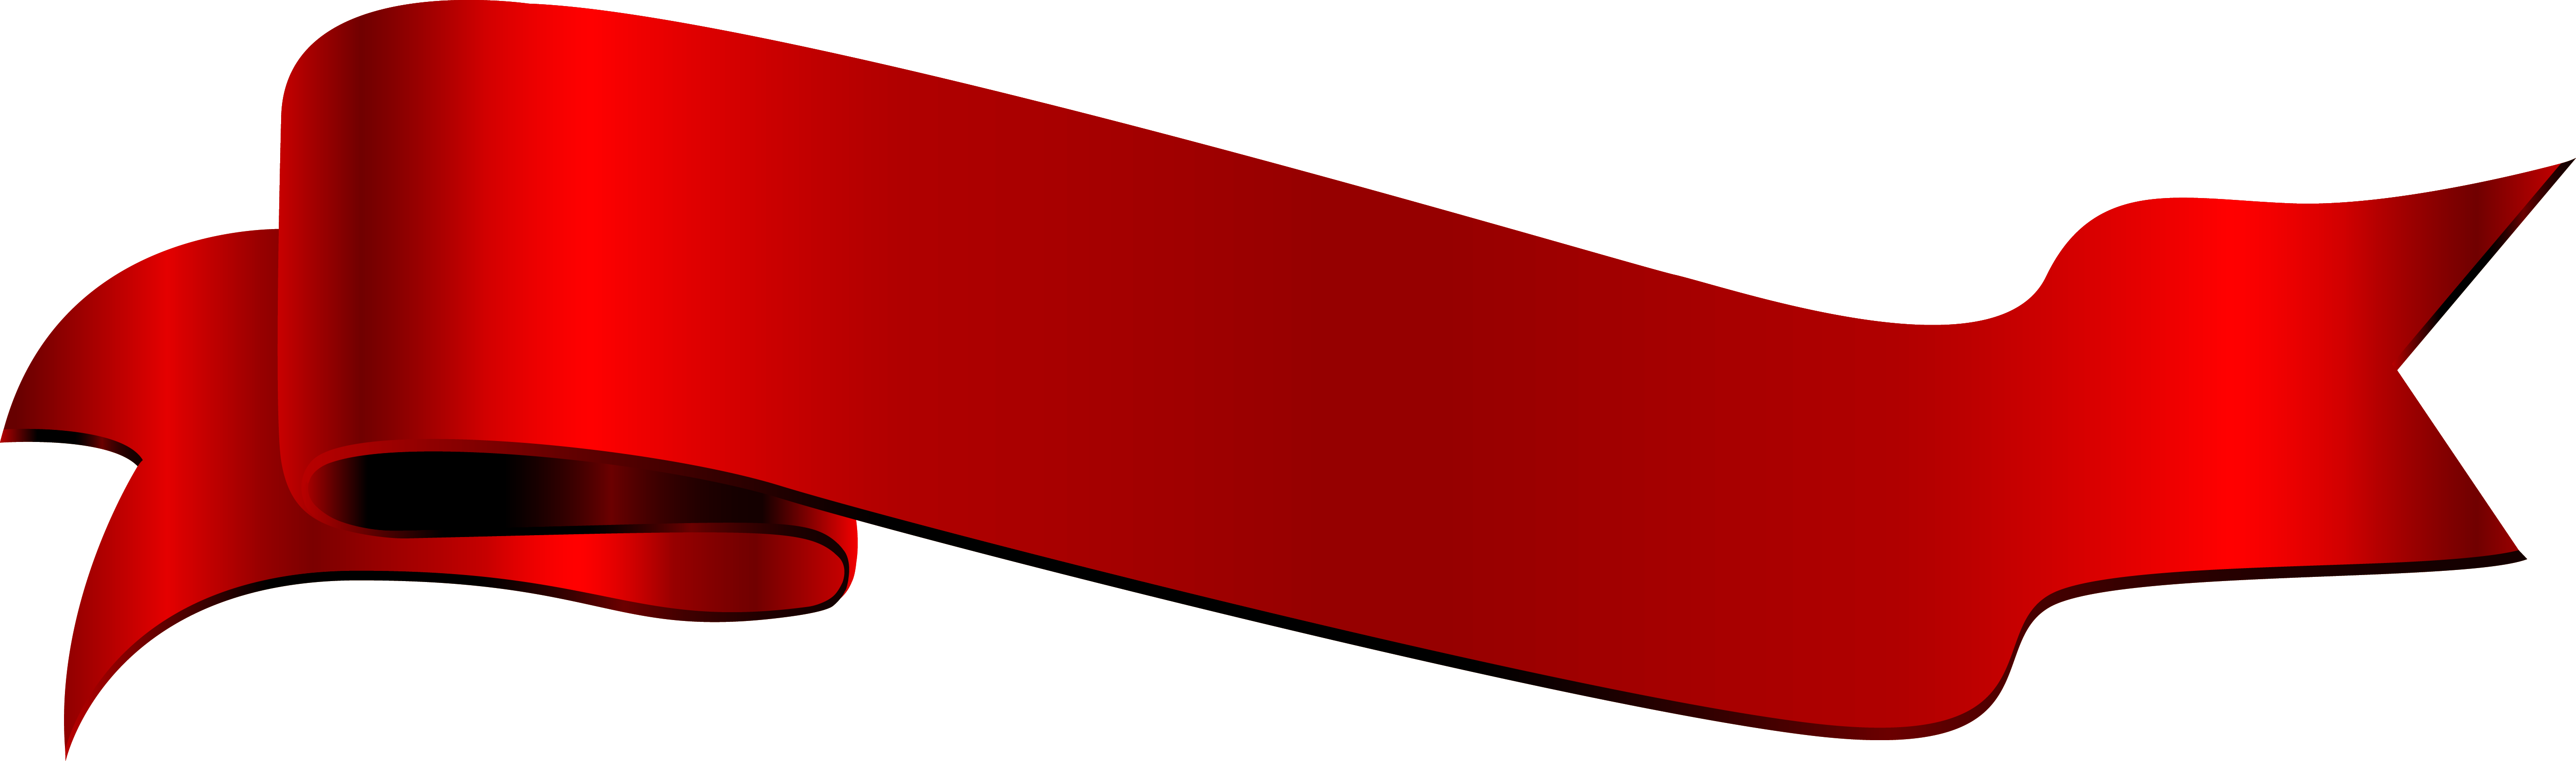 Red Ribbon Banner Graphic PNG